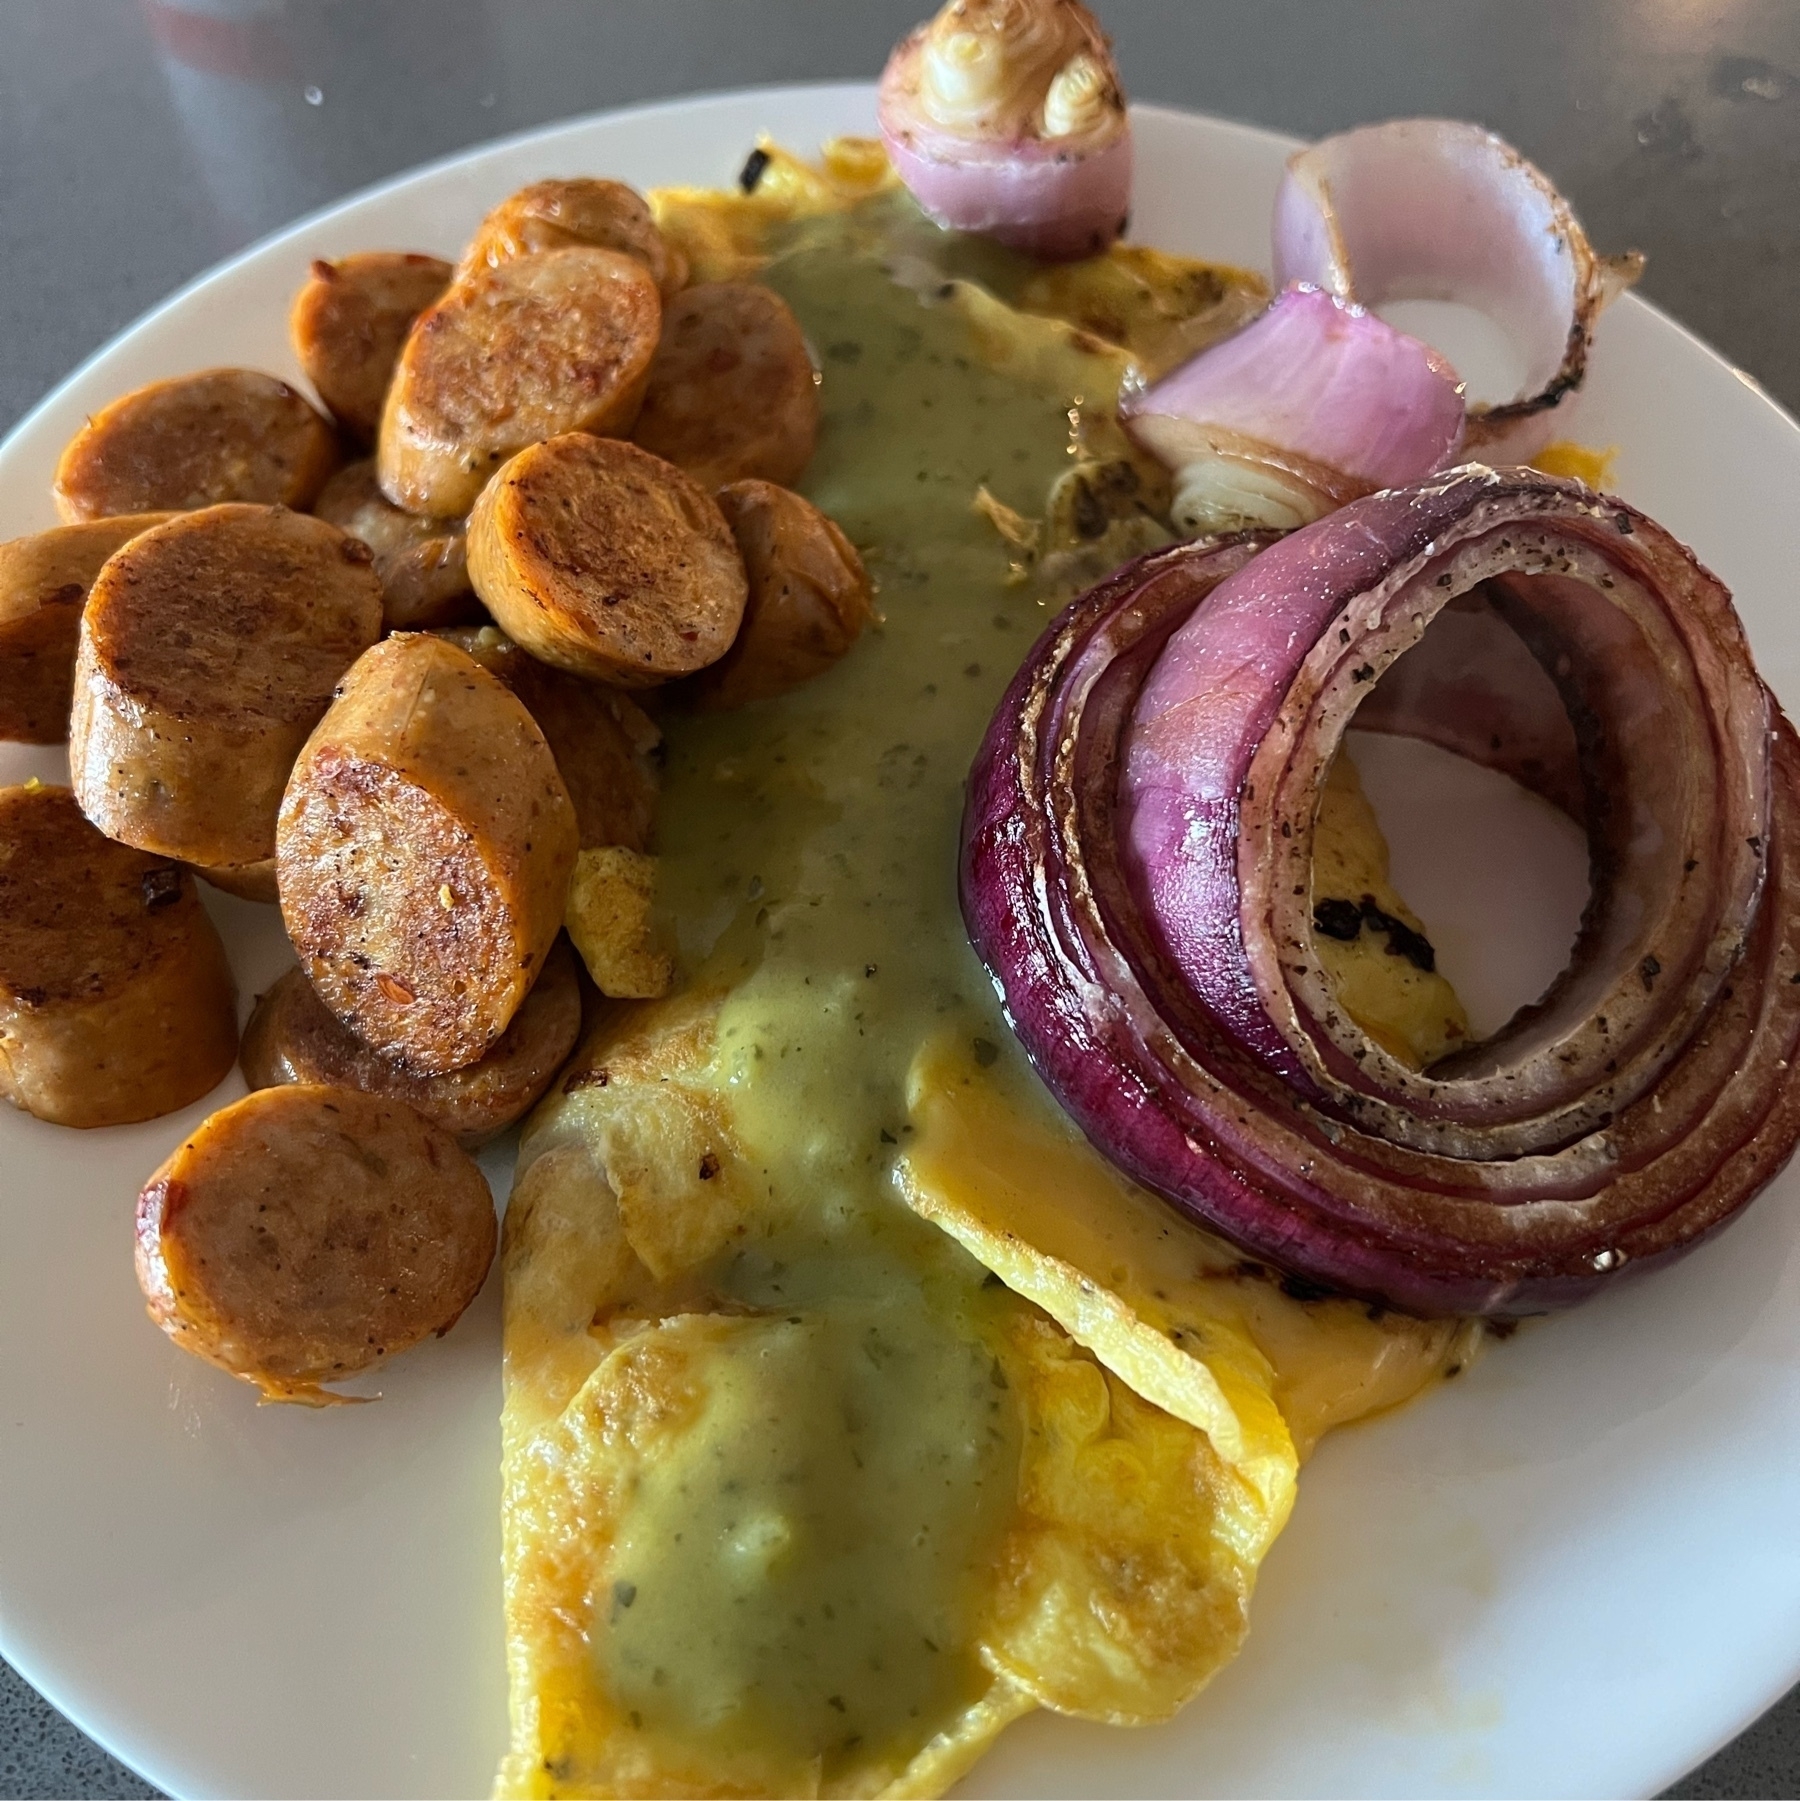 Chicken sausage, roasted red onion, thin omlette, and avocado salsa.